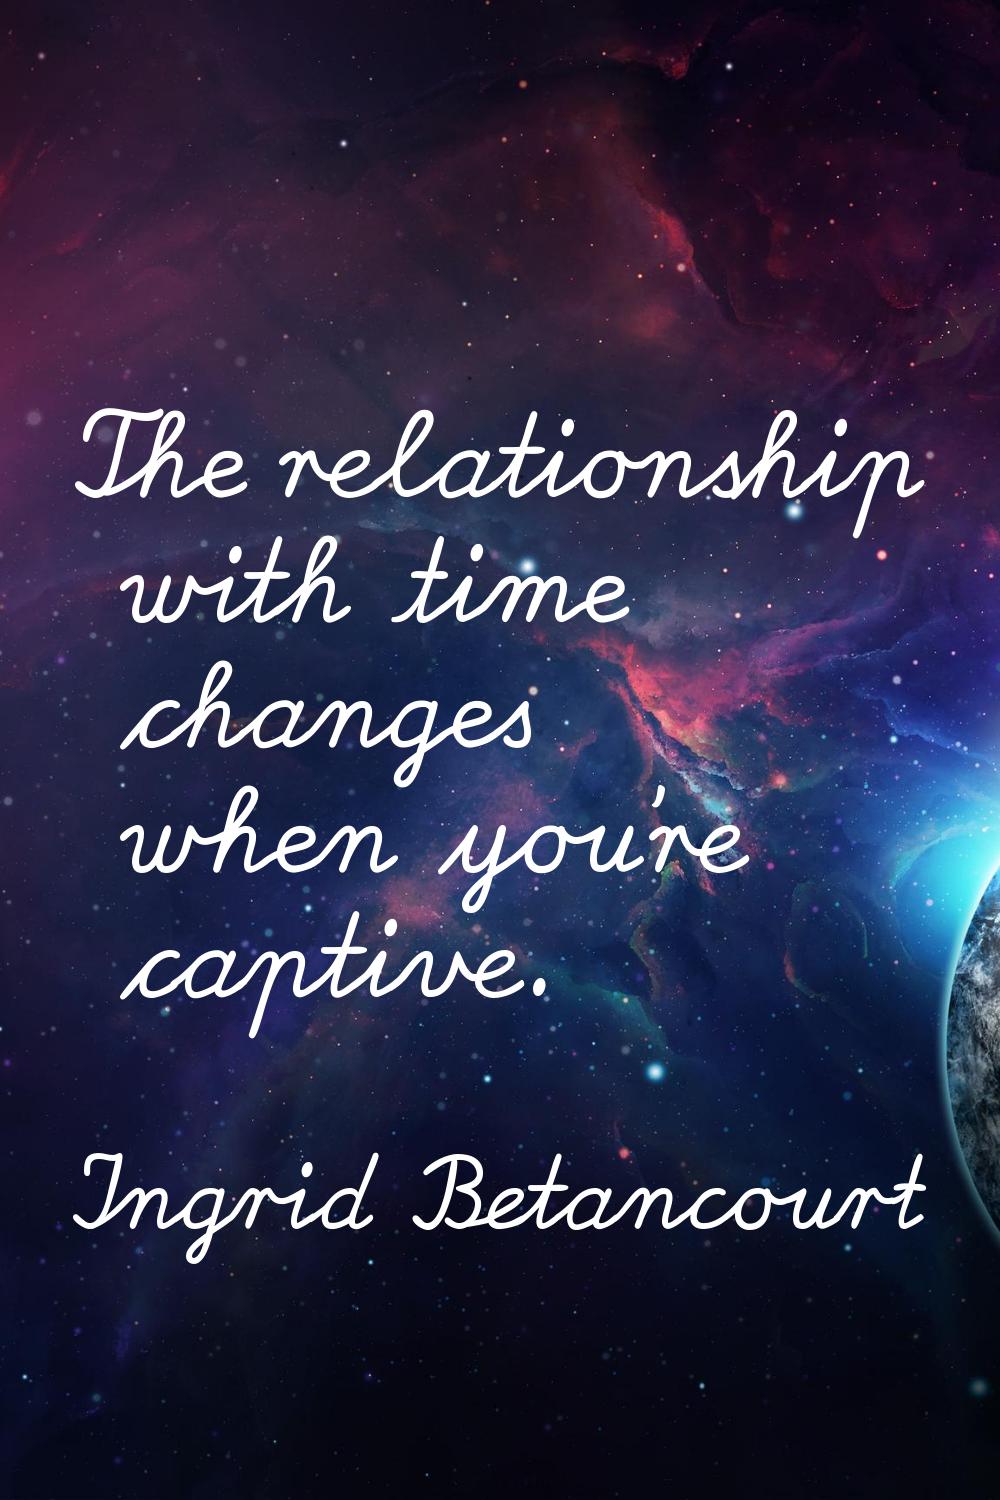 The relationship with time changes when you're captive.